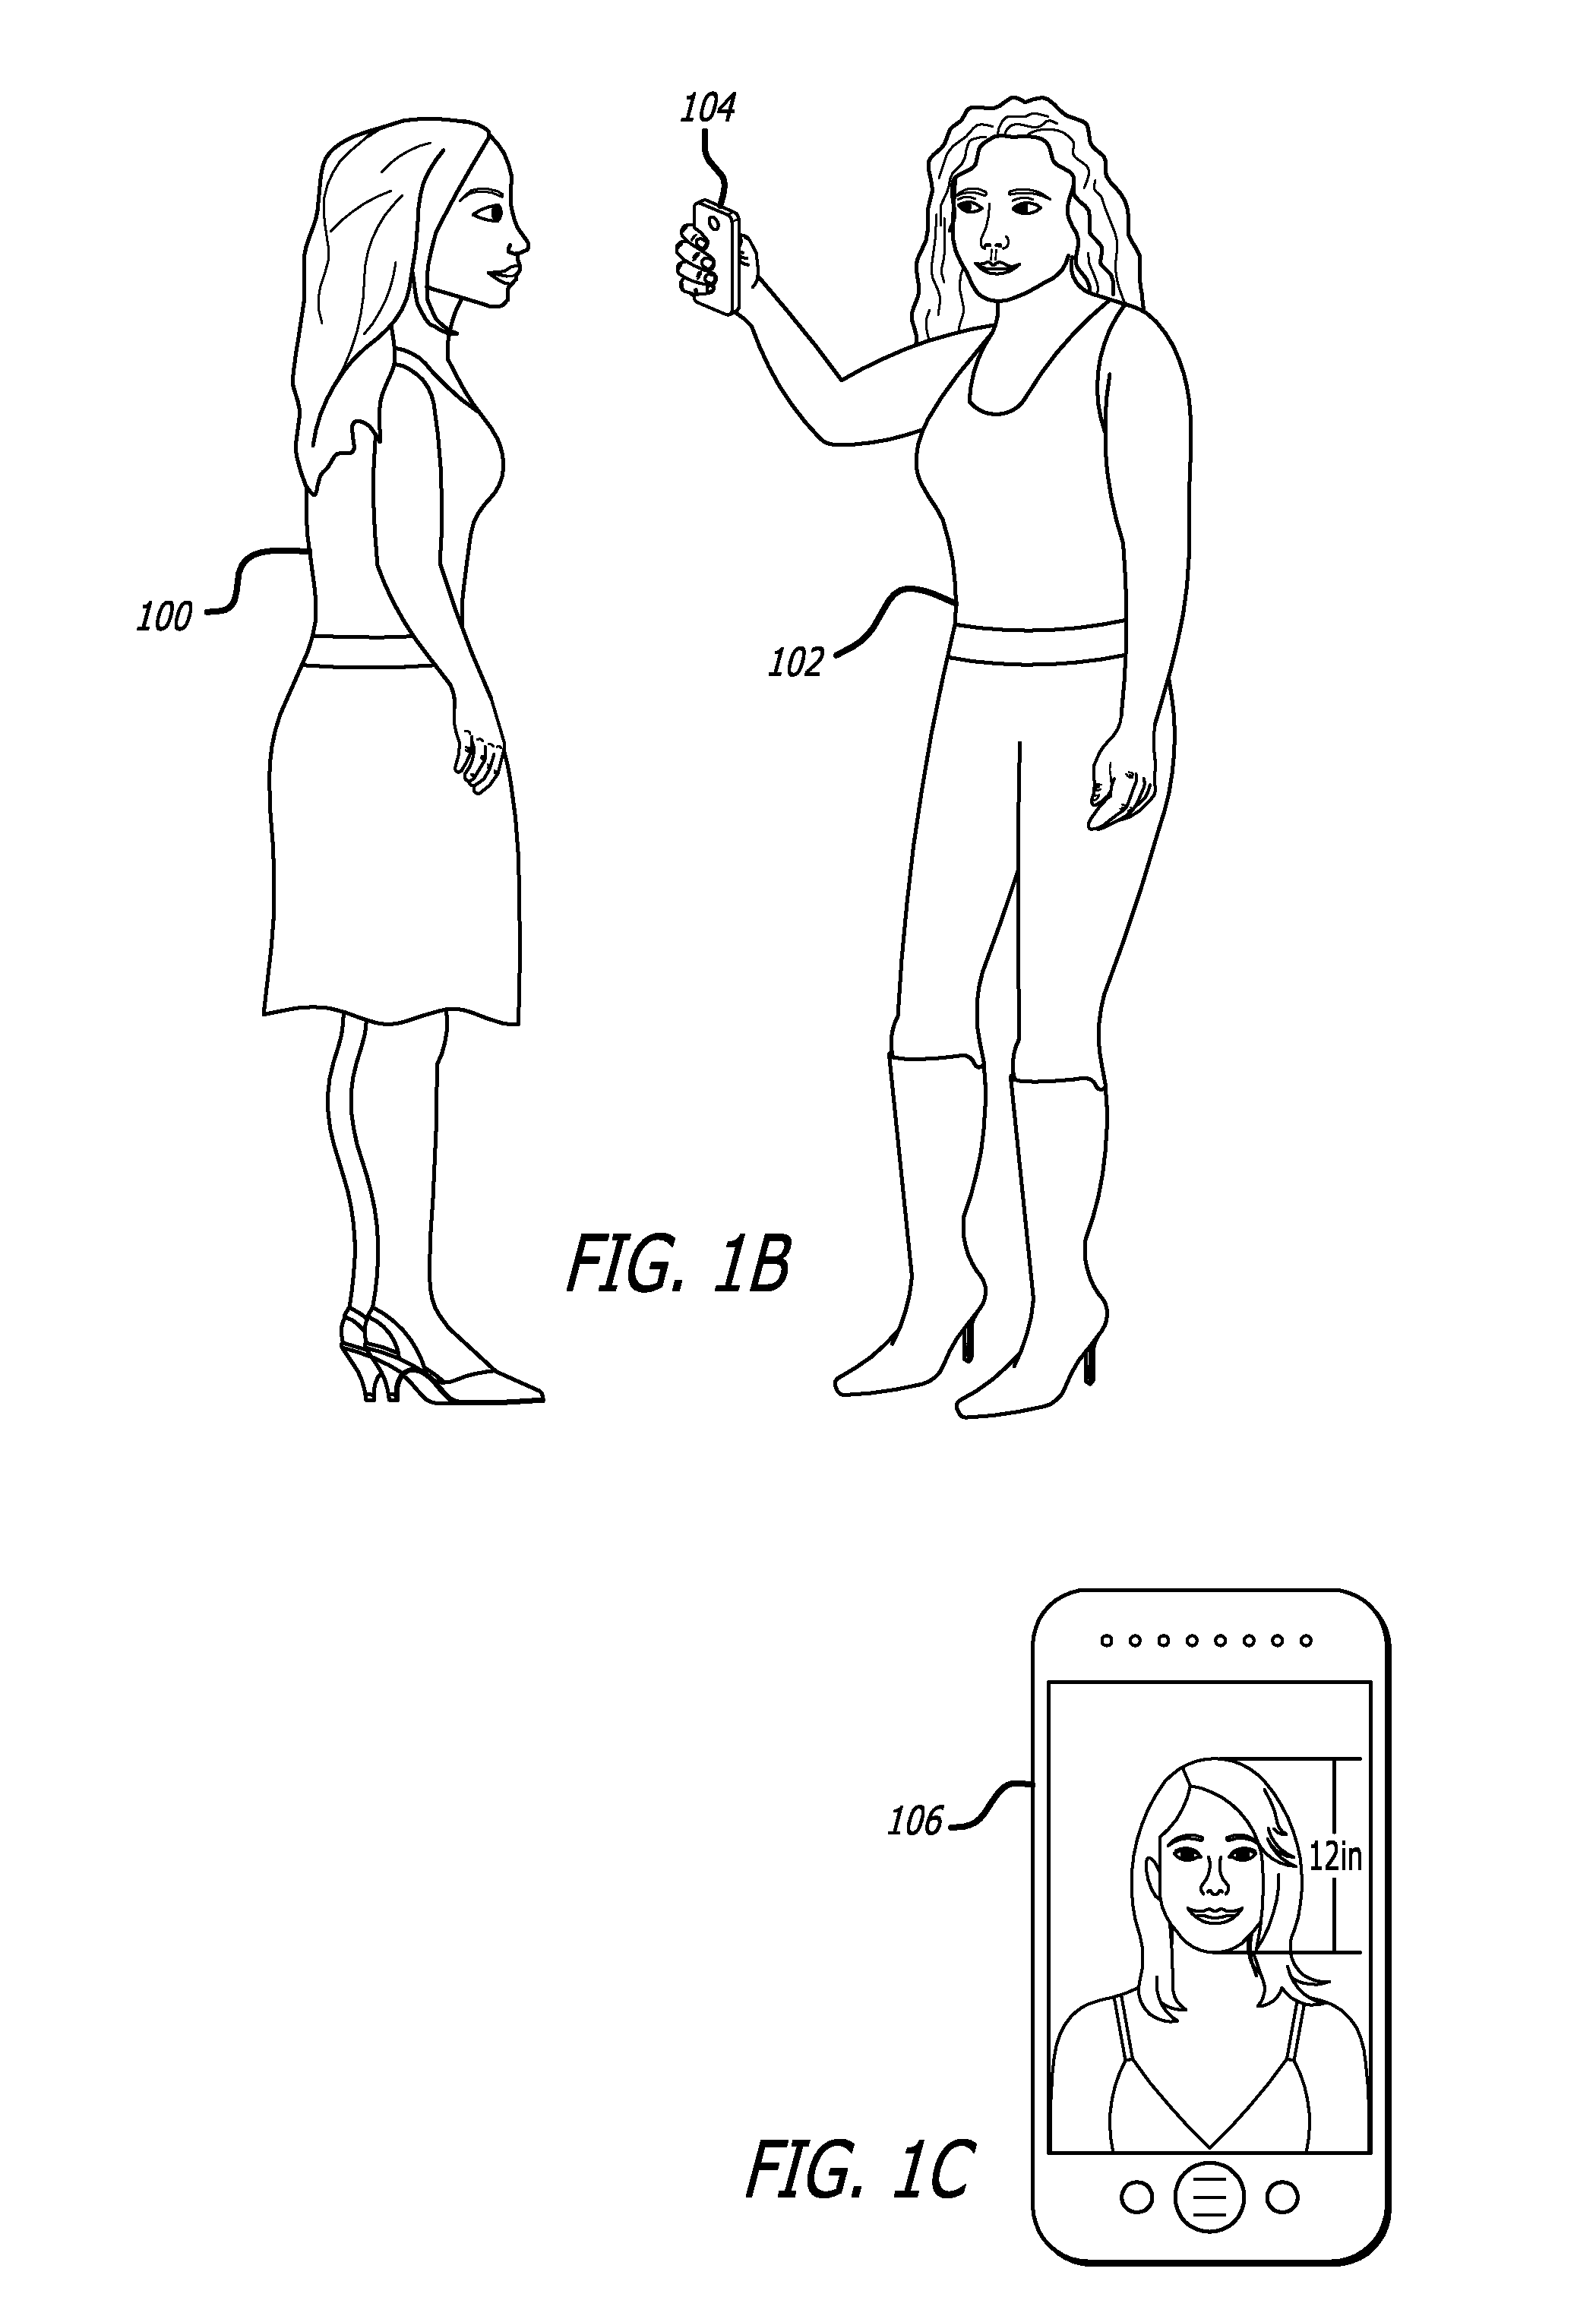 Method and system for personalization of a product or service